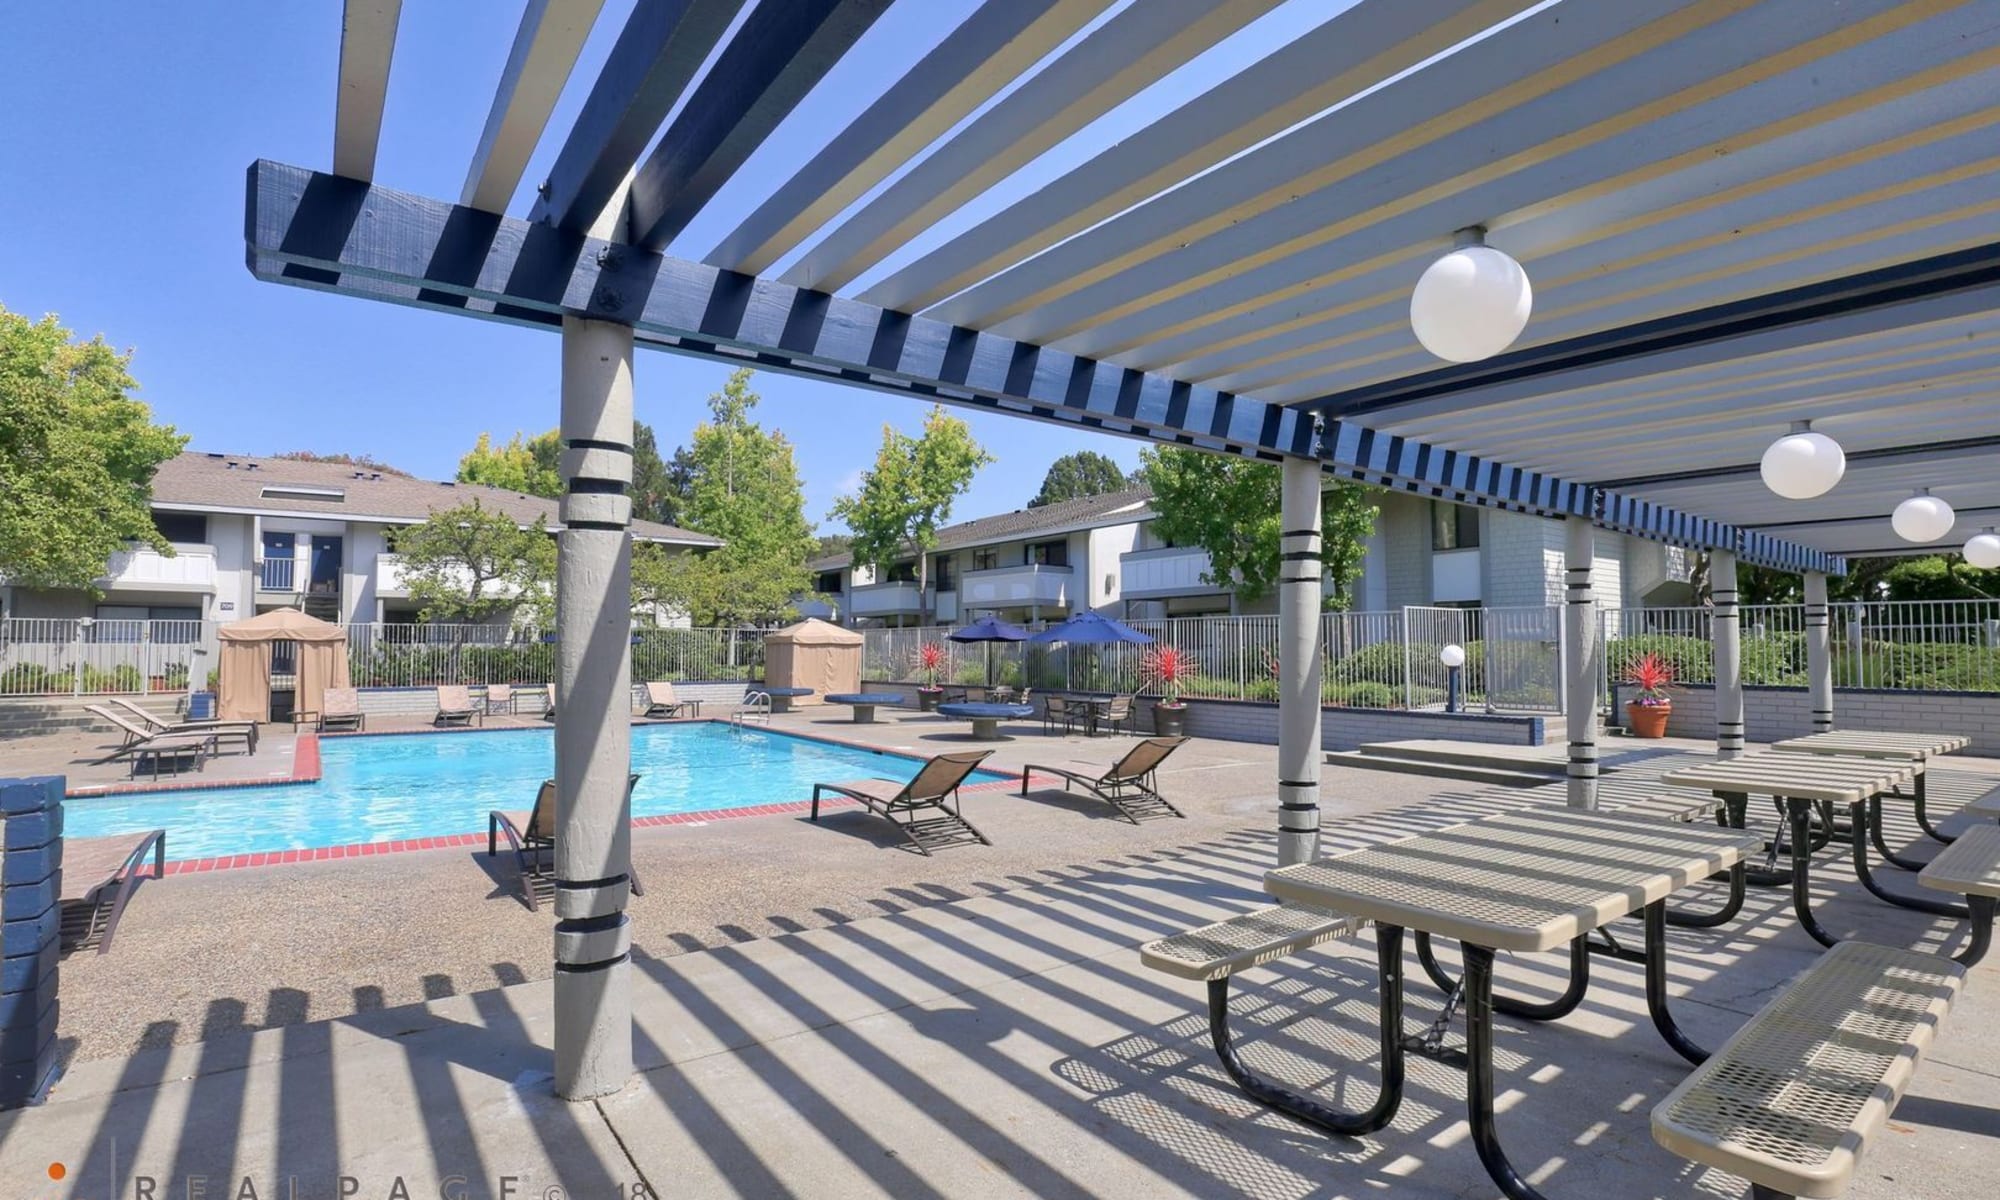 Pool area at Beach Cove in Foster City, California